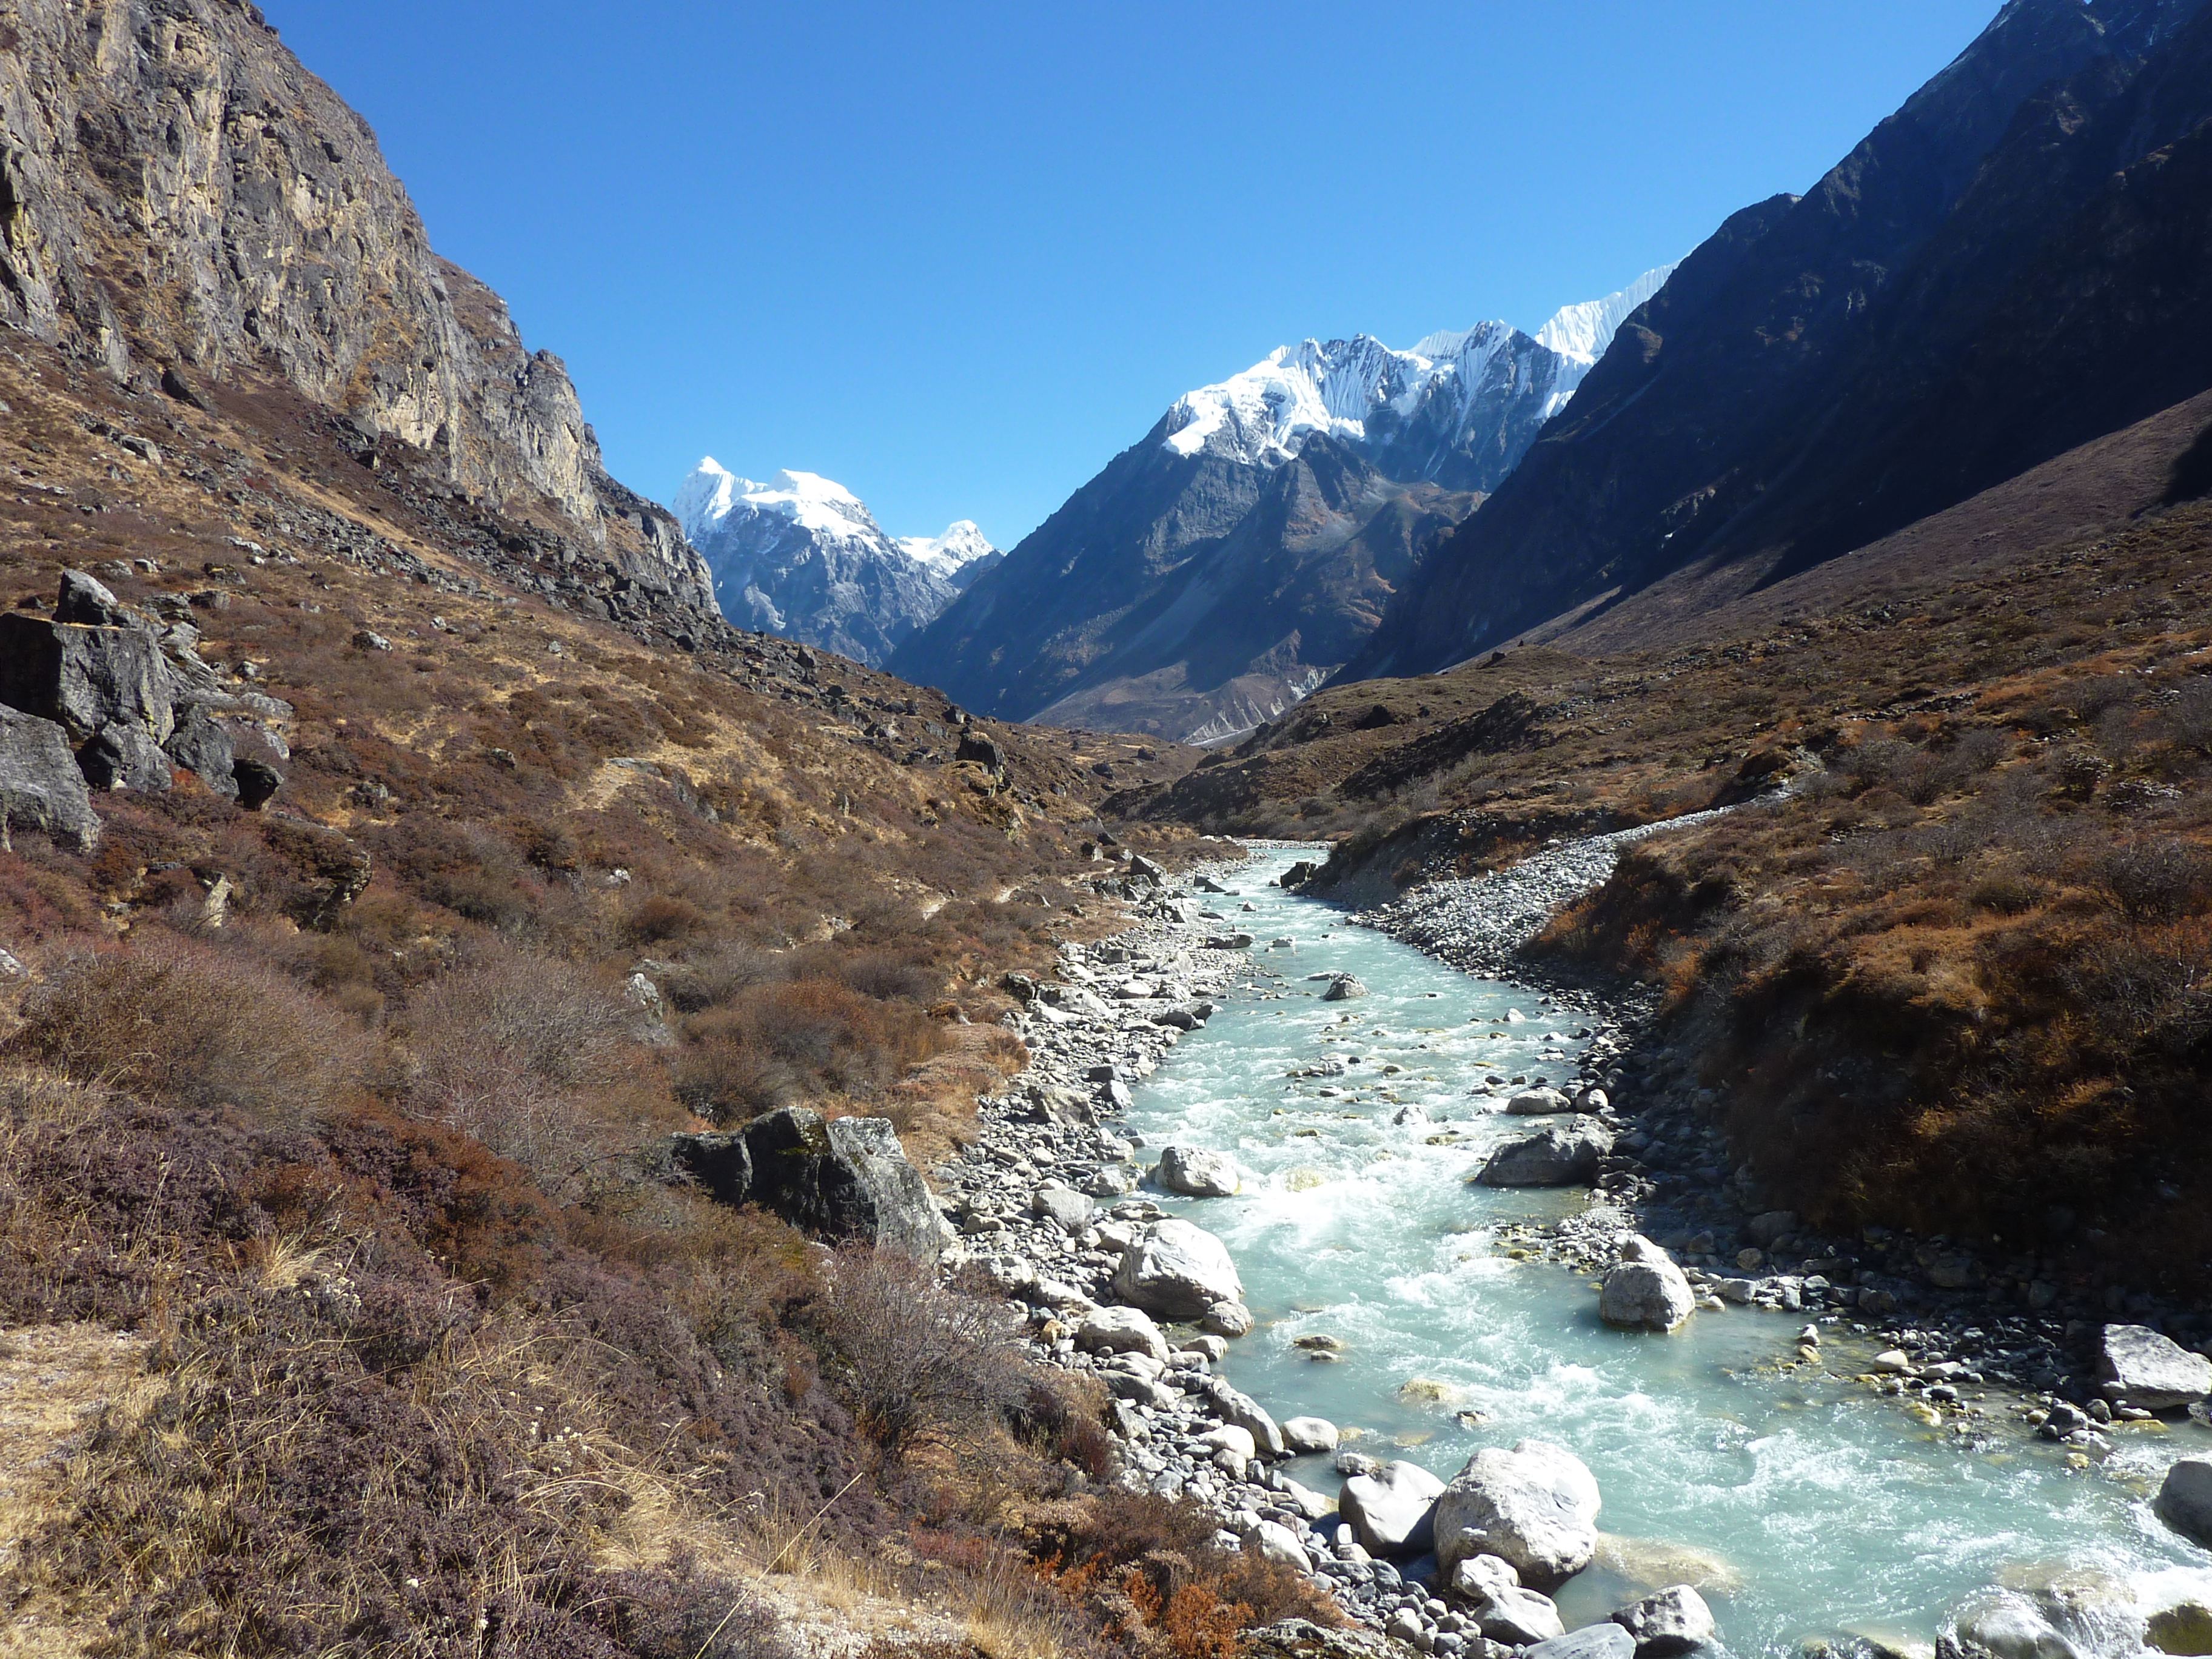 Further up the Langtang Valley